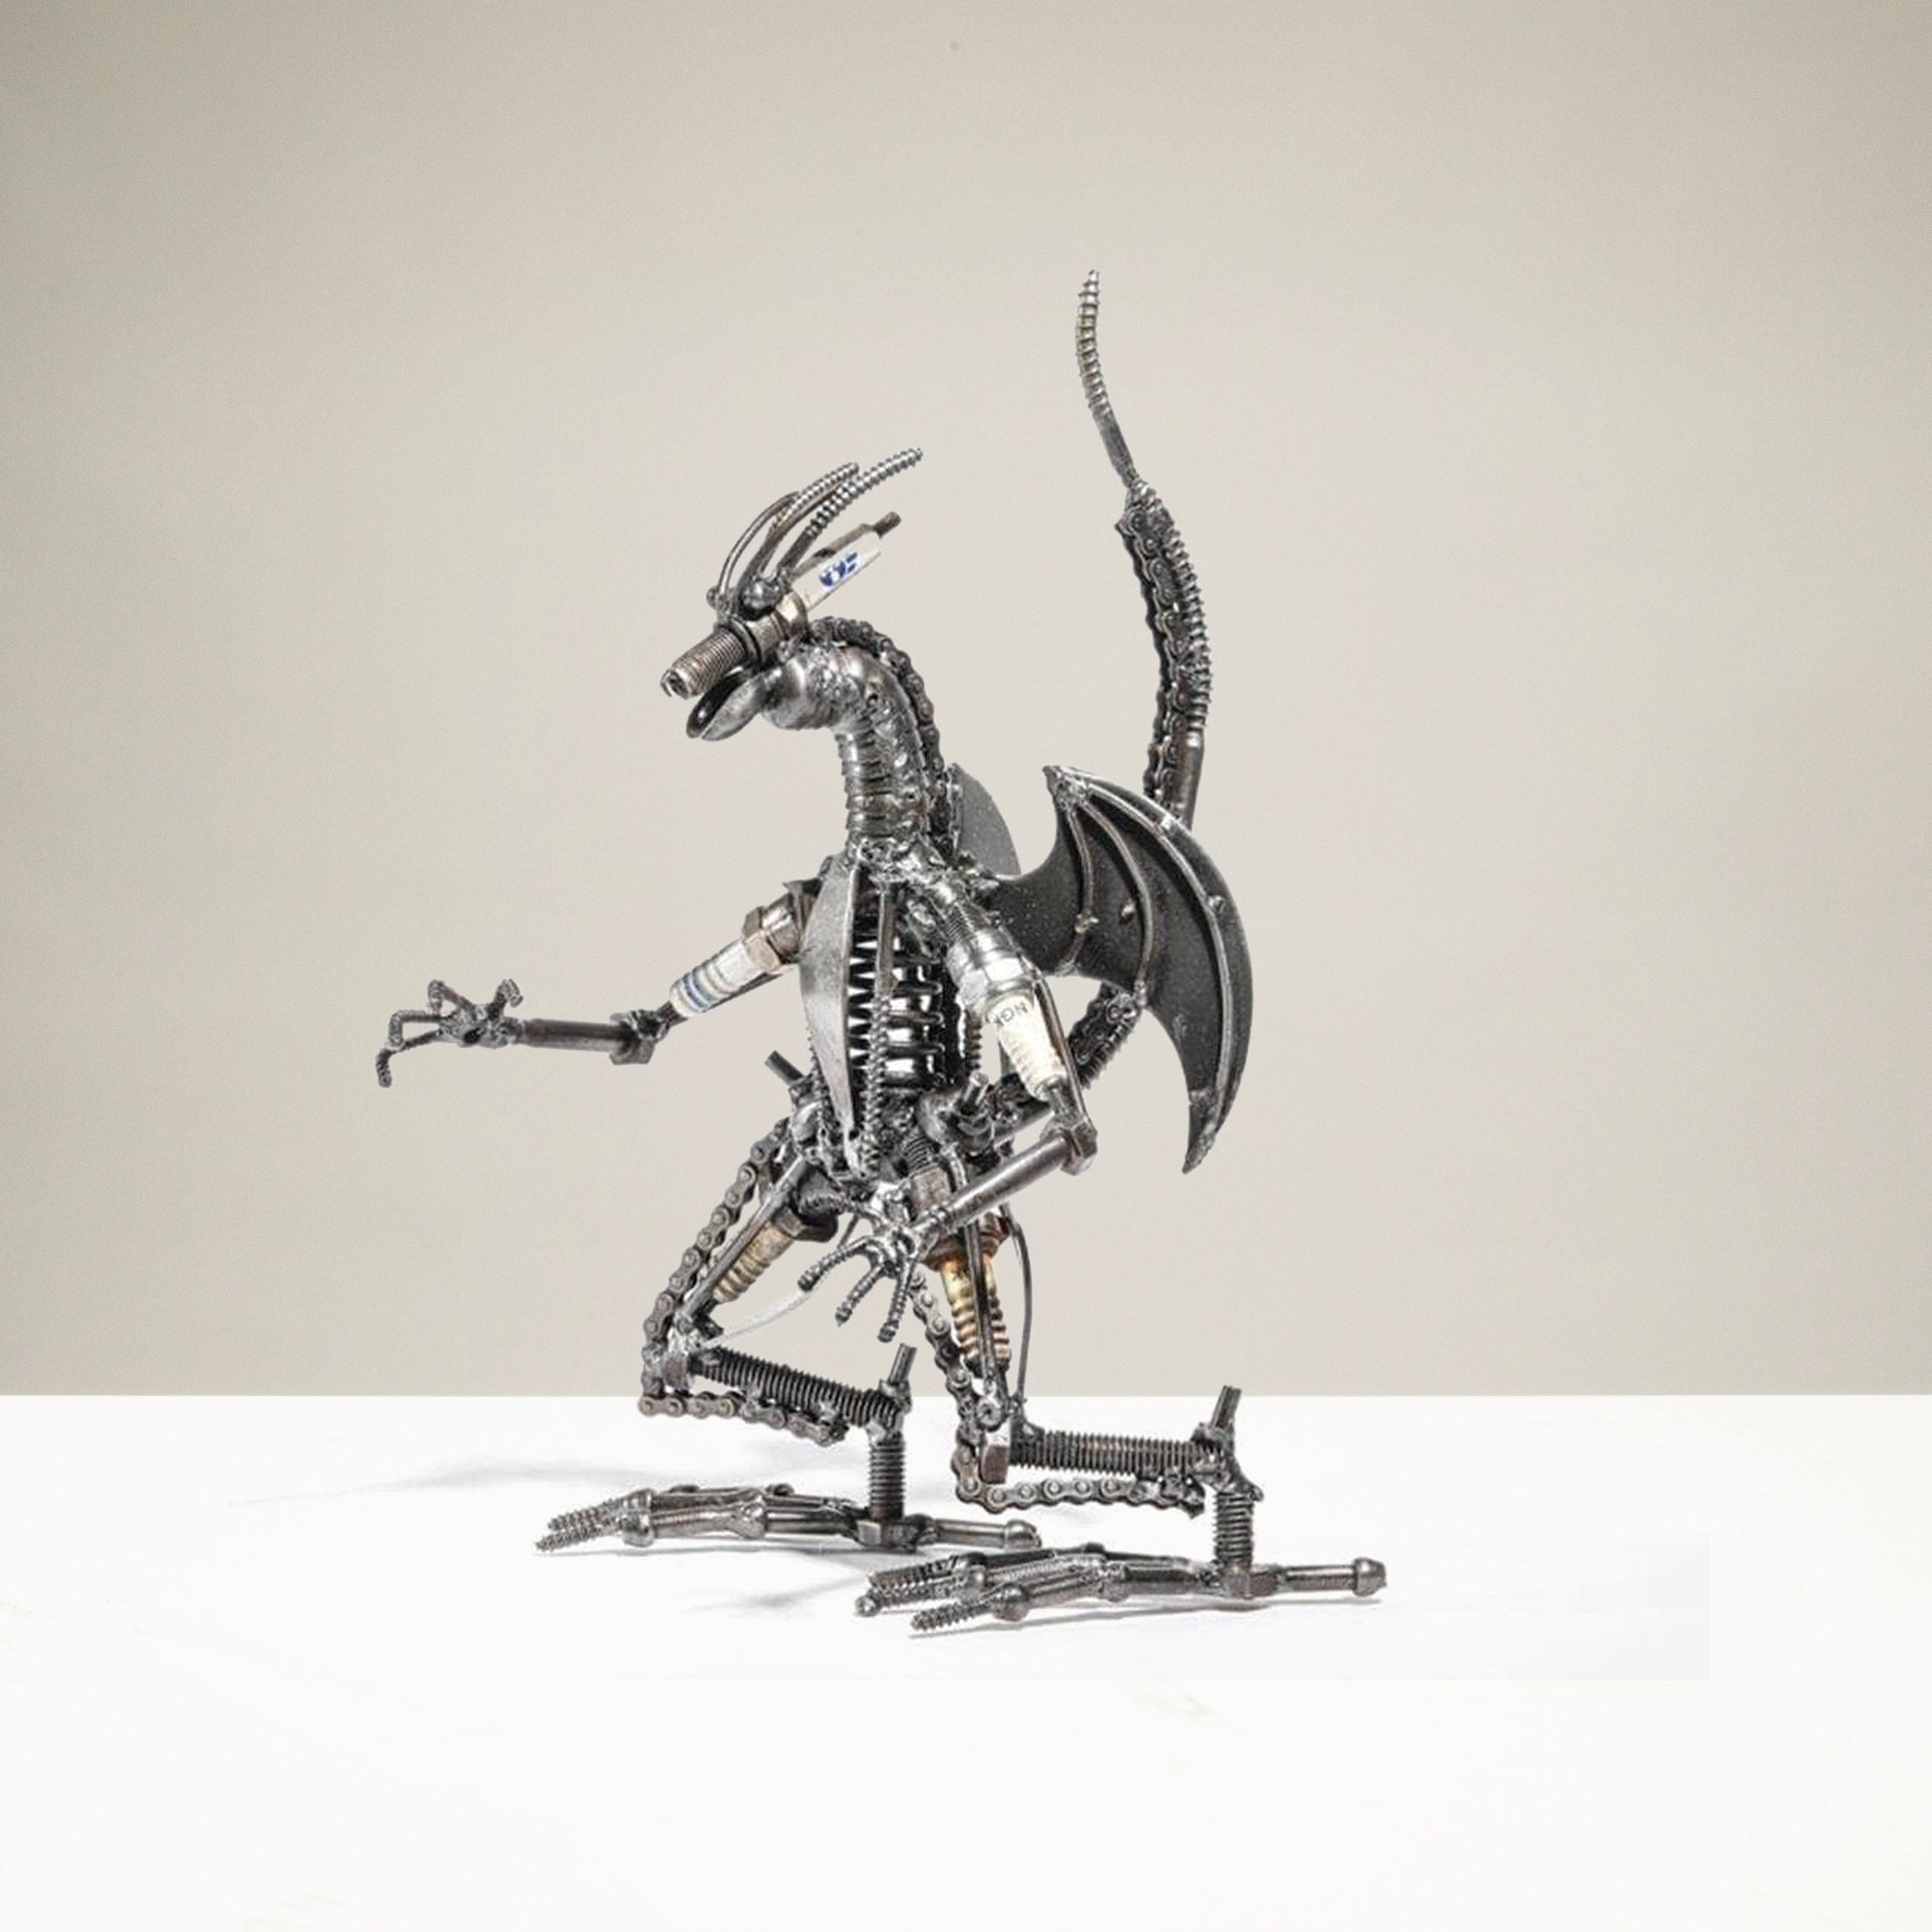 Kalifano Recycled Metal Art Small Dragon Inspired Recycled Metal Sculpture RMS-600DG-N